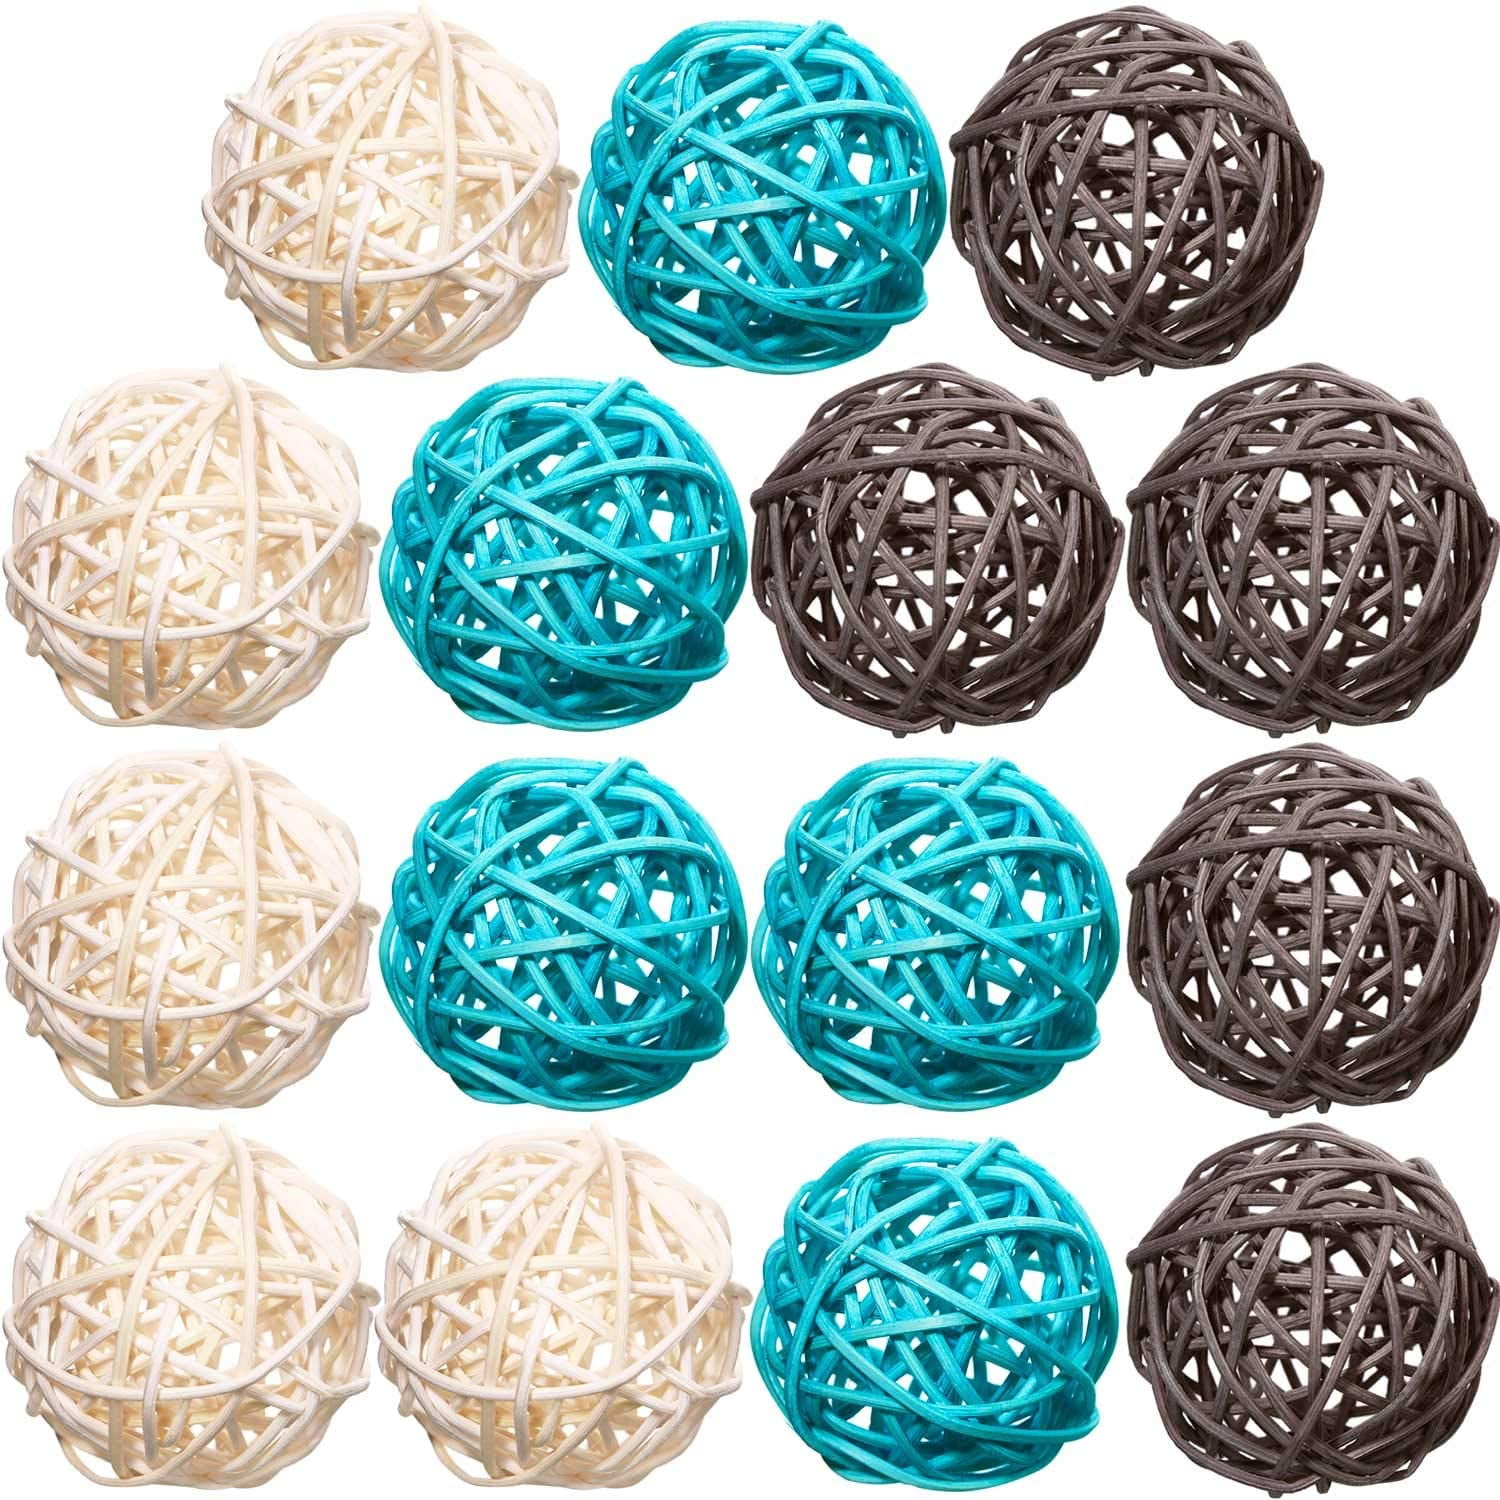 Wicker Rattan Balls,Love Shape 16, Blue Comes with Lanyard and Photo Clip Wedding Table Decoration,Themed Party,Aromatherapy Accessories Decorative Ball Orbs Vase Fillers for Craft Project